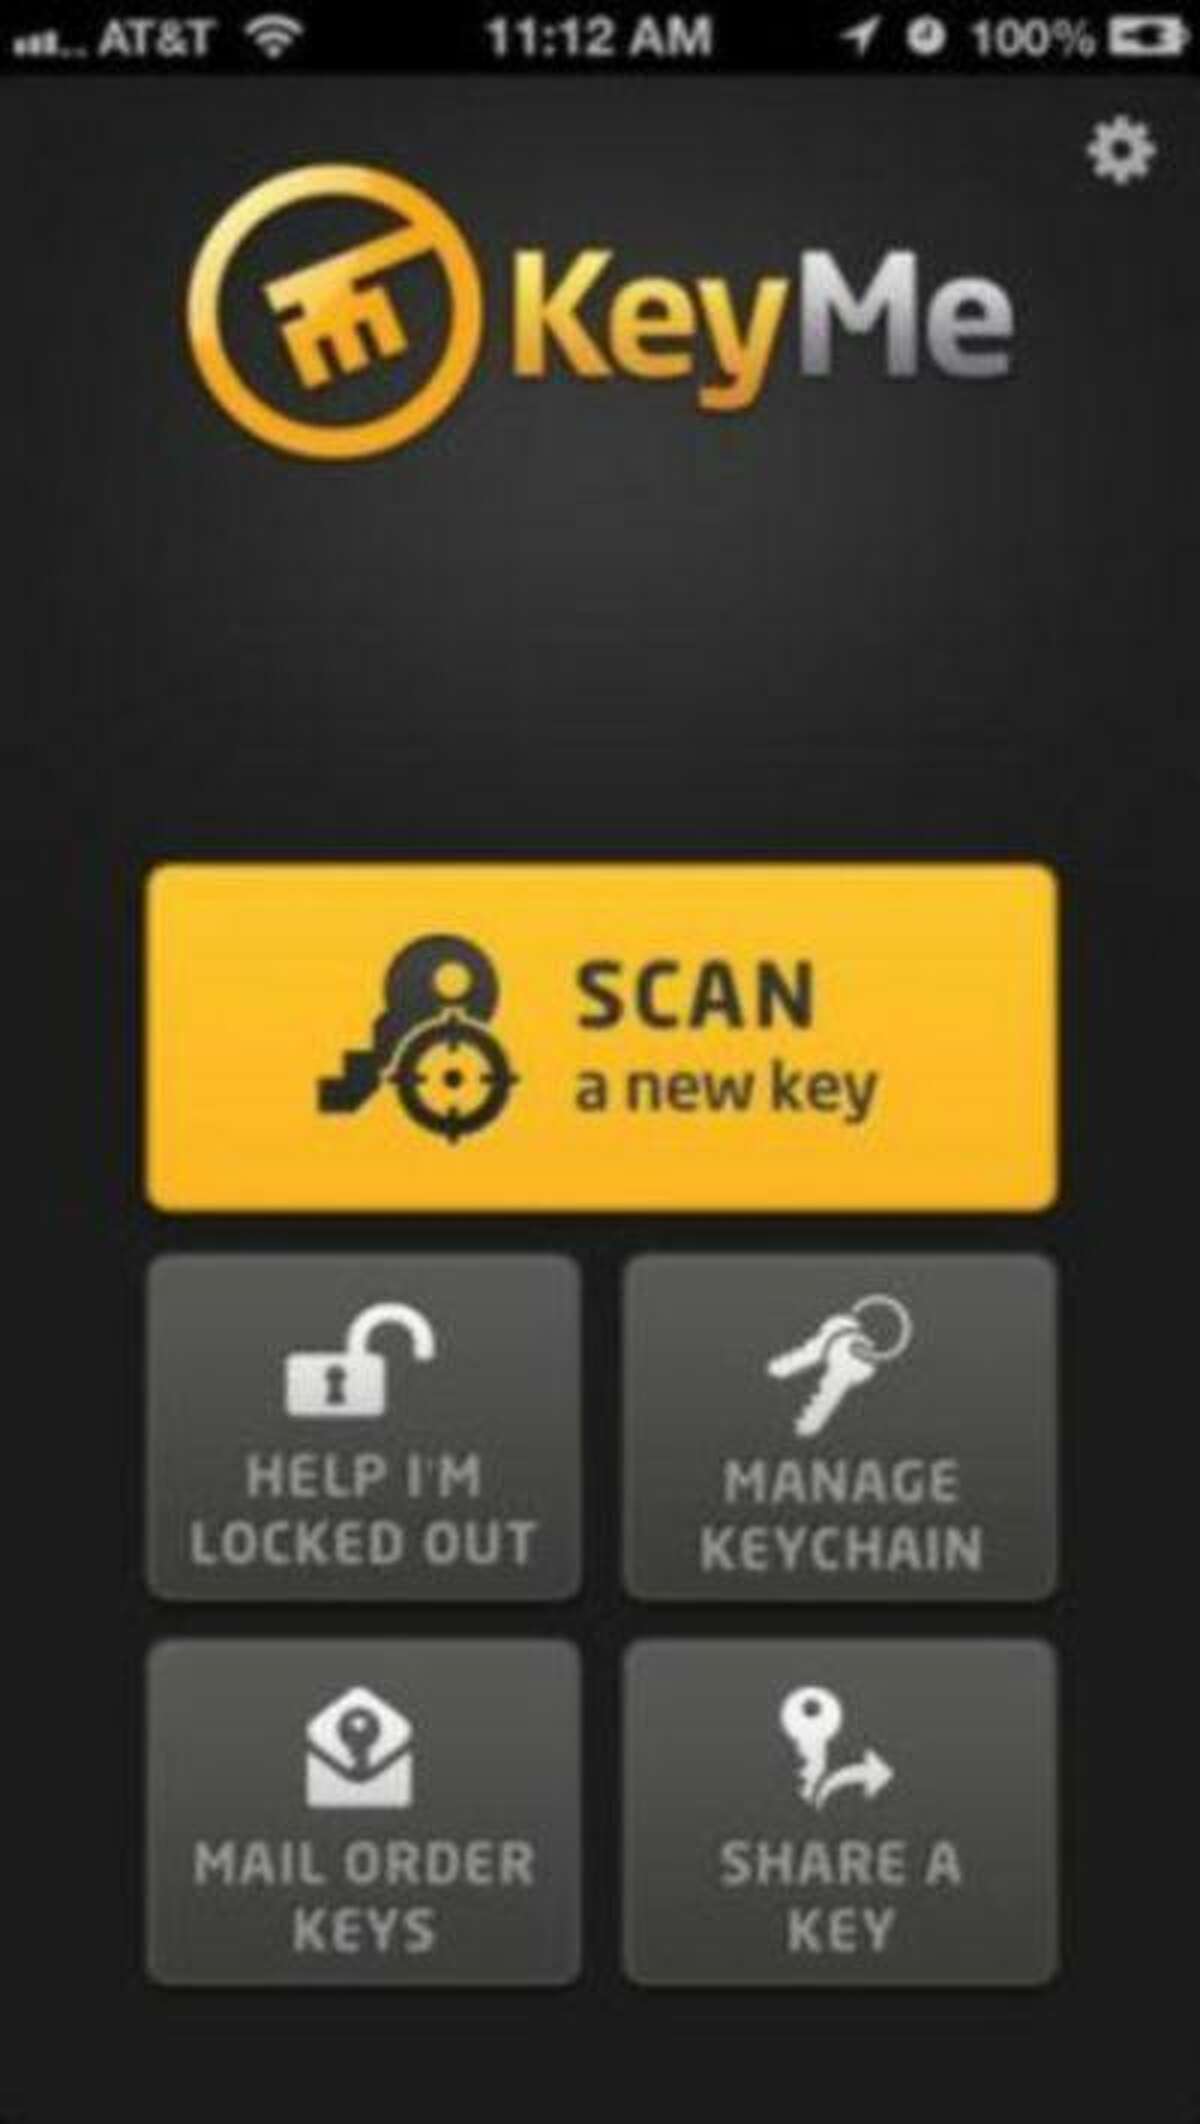 This free app stores images of your keys, which can be used to create an exact replica by a locksmith. (KeyMe)